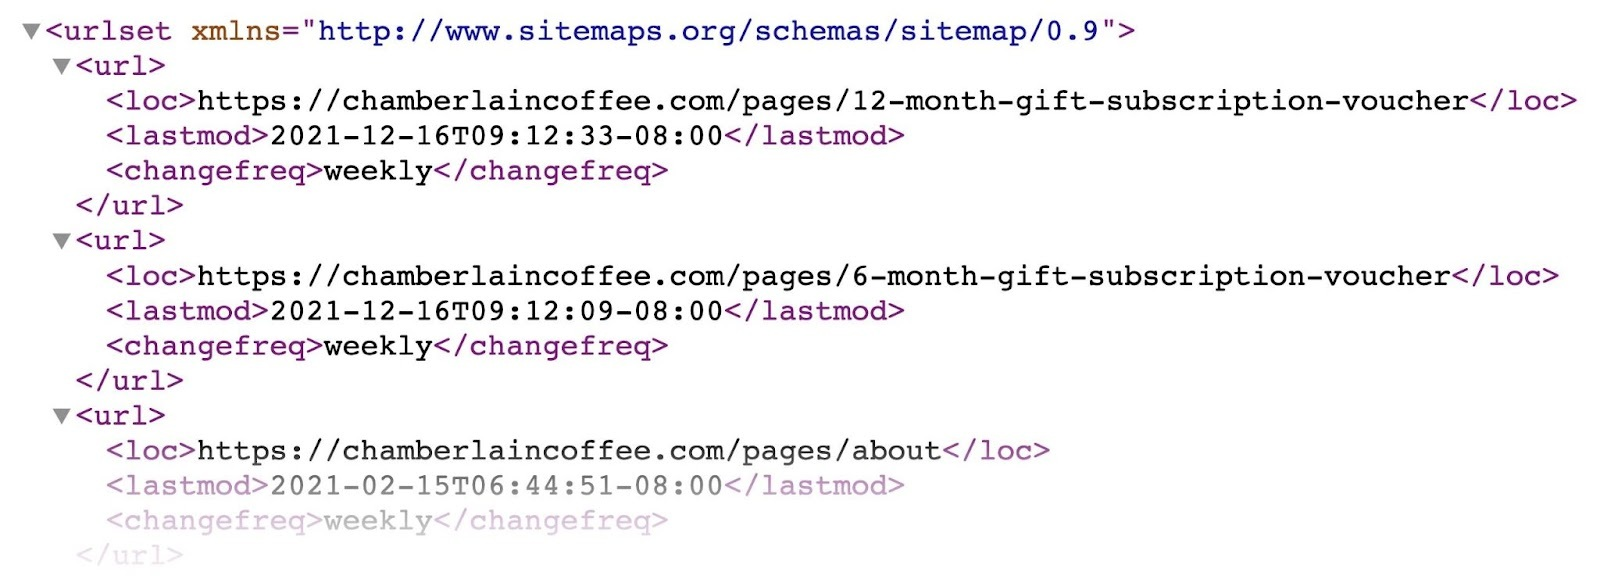 A conception  of an XML sitemap